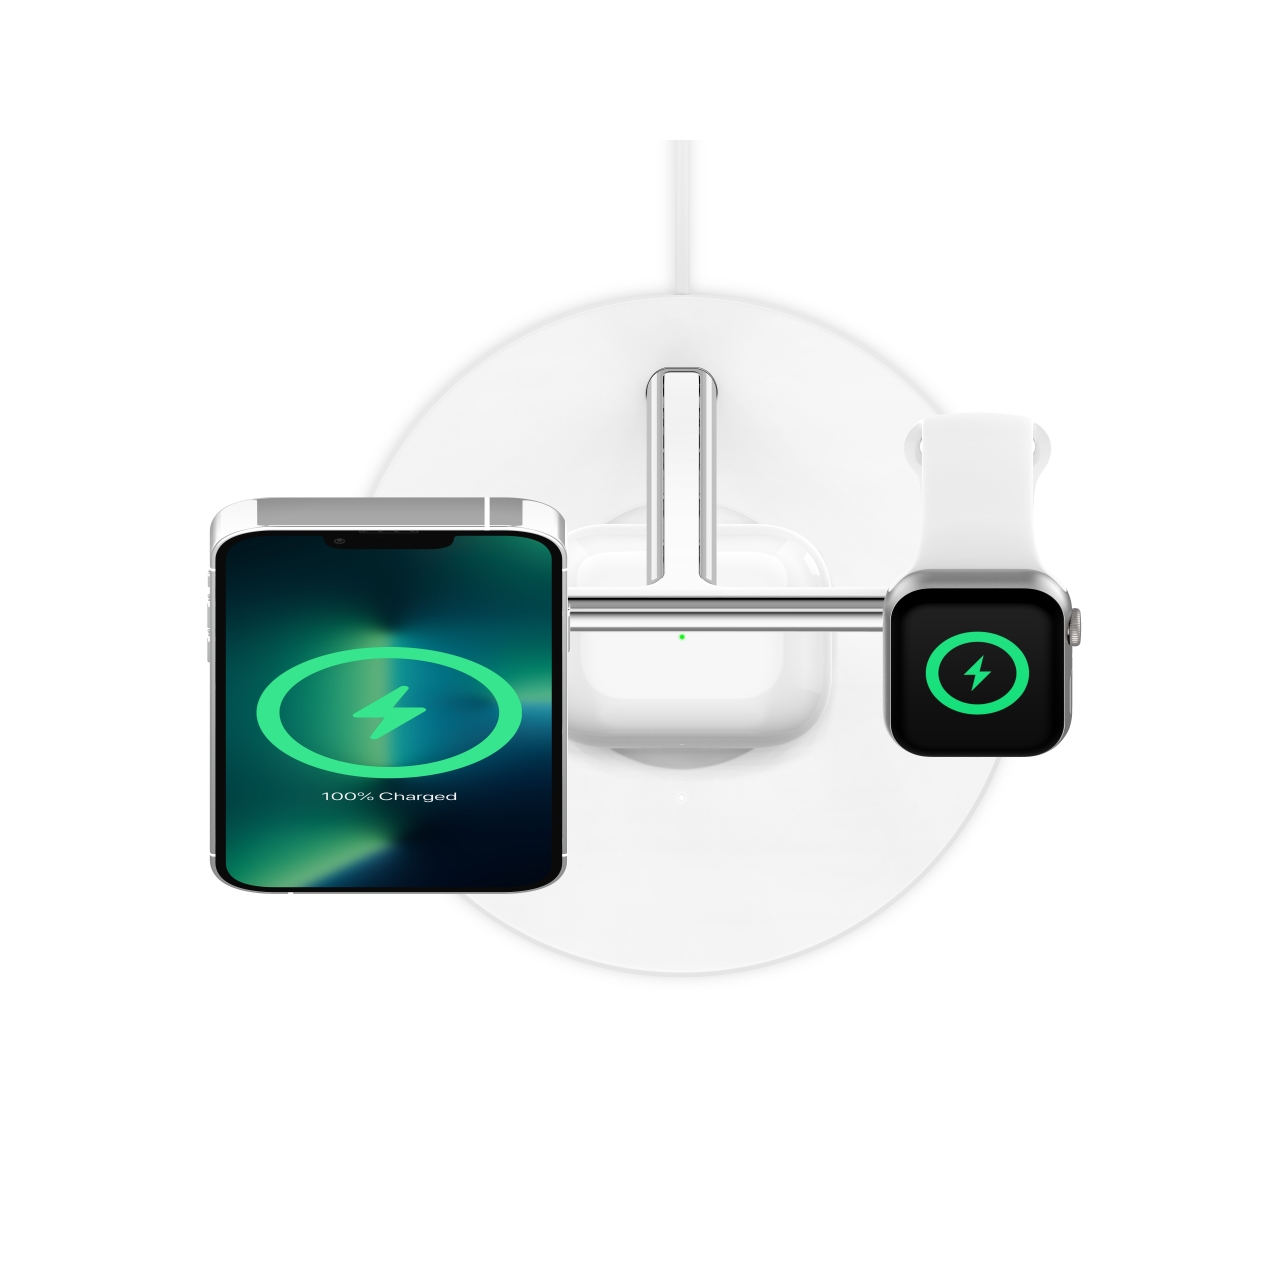 TAPPETINO DI RICARICA WIRELESS MAGSAFE 3 IN 1 W.WATCH FAST CHARGE -
BIANCO-2